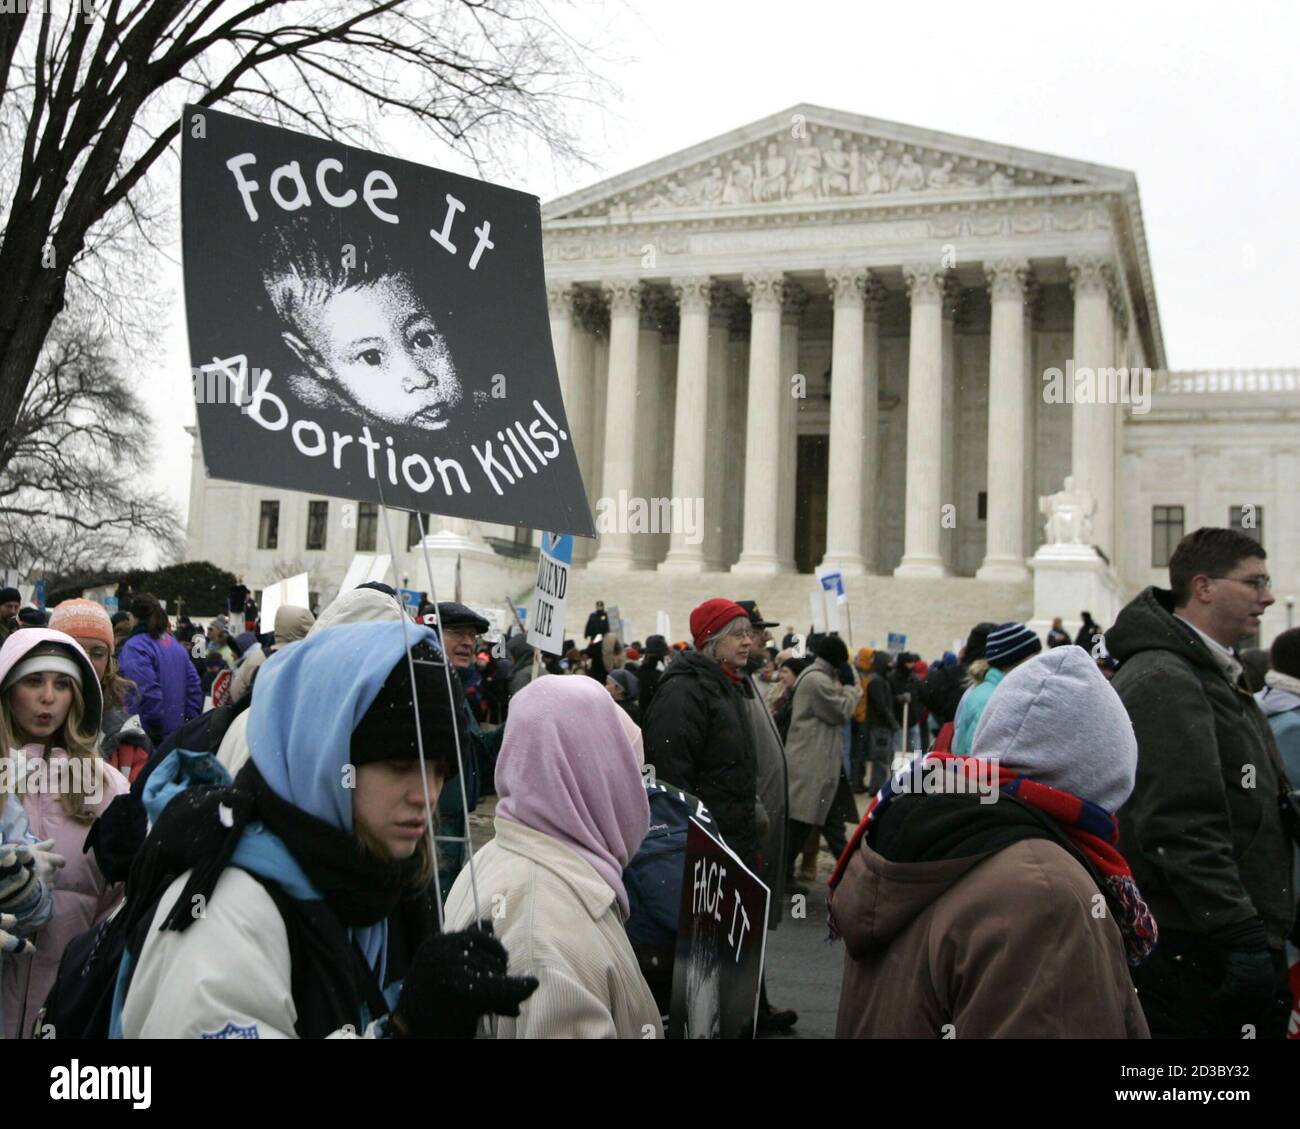 Anti-abortion protestors march outside the U.S. Supreme Court in Washington January 24, 2005, during the 32nd annual March For Life protest against the Supreme Court's 1973 Roe v. Wade abortion rights decision. Thousands of pro-life activists marched to the Supreme Court where they were met by a handful of pro-choice campaigners. REUTERS/Jason Reed  JIR Stock Photo